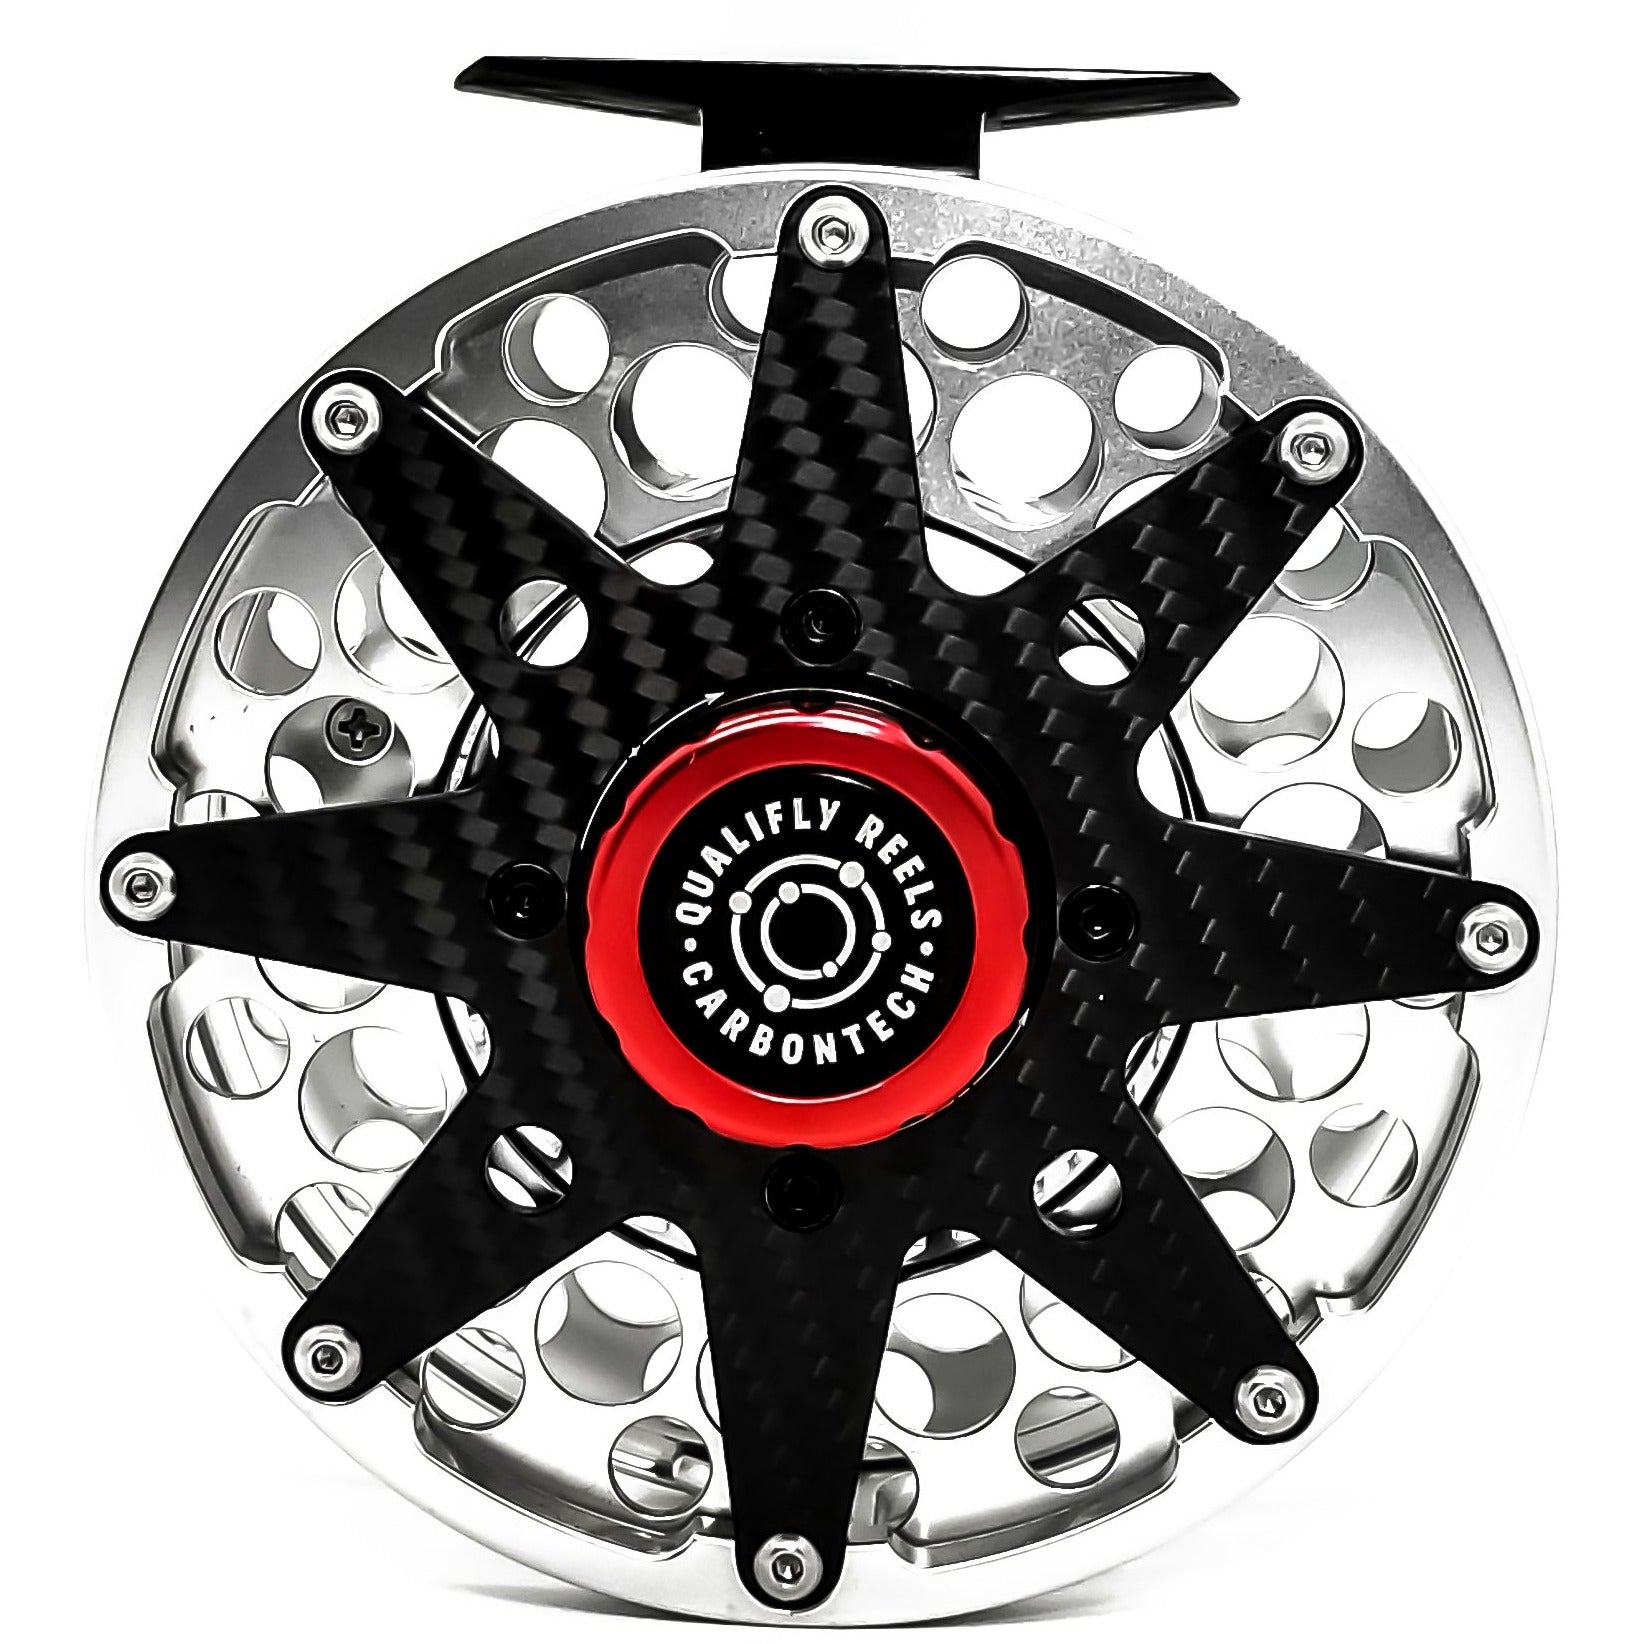 Qualifly CARBONTECH 11/12 Weight Fly Fishing Reel